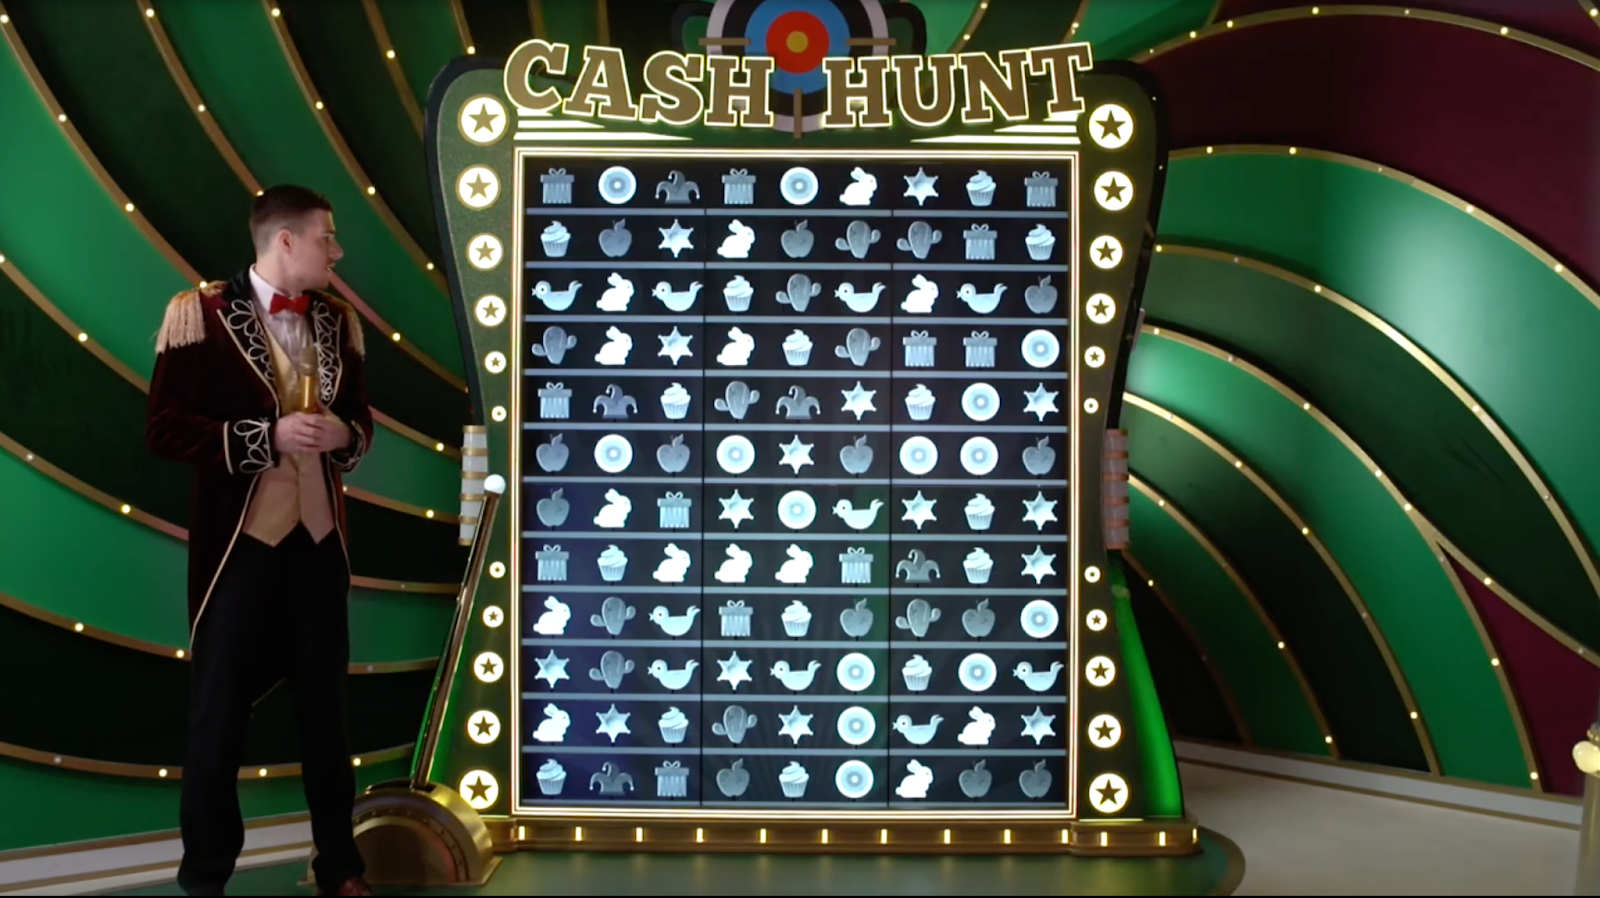 An exciting image depicting the captivating Cash Hunt Bonus feature in the Crazy Time game, offering participants an exhilarating opportunity to win enticing cash prizes.